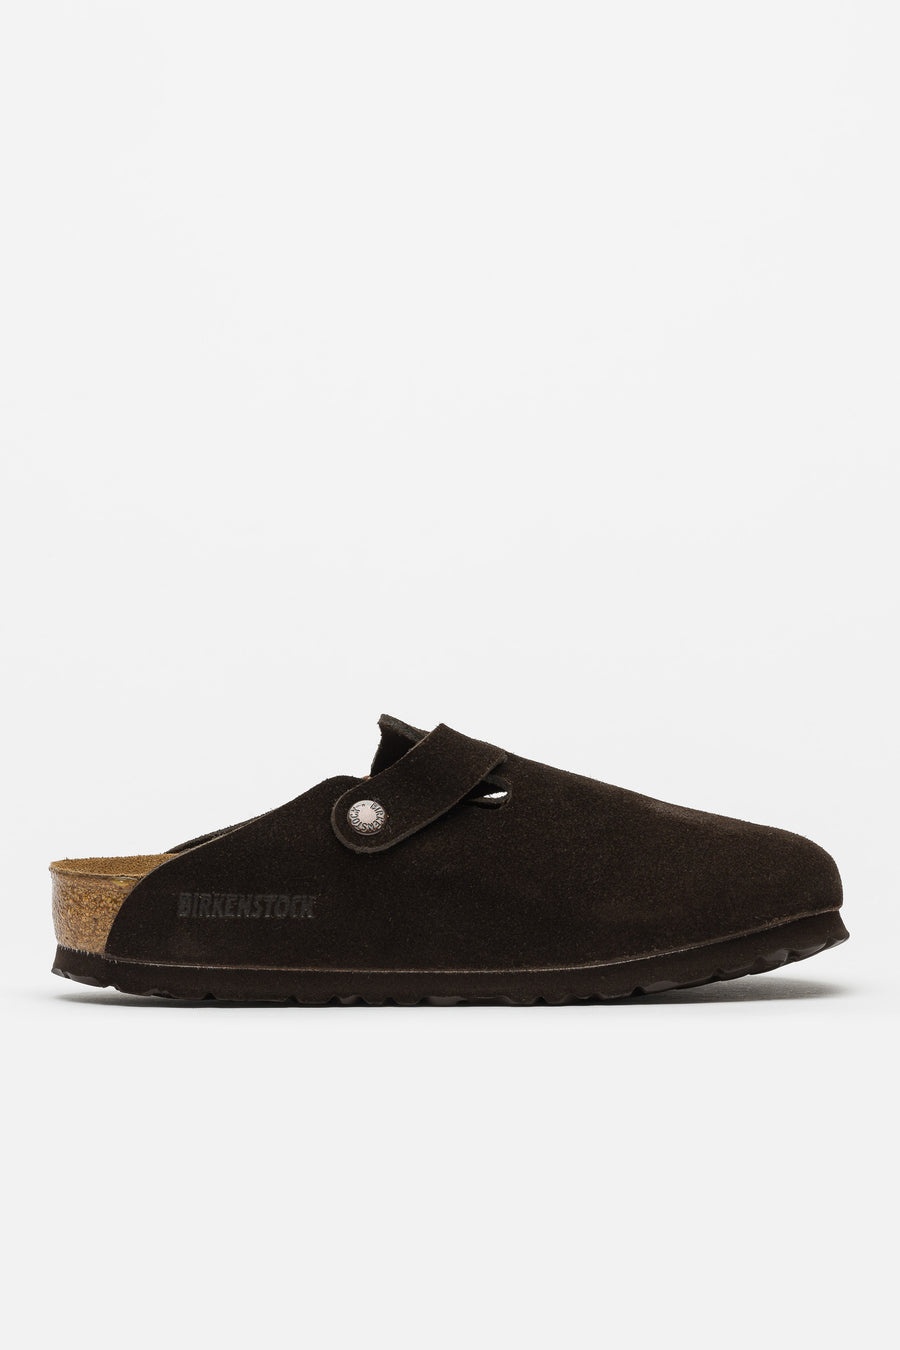 Boston Soft Footbed Suede/Leather Mule in Mocha - 3